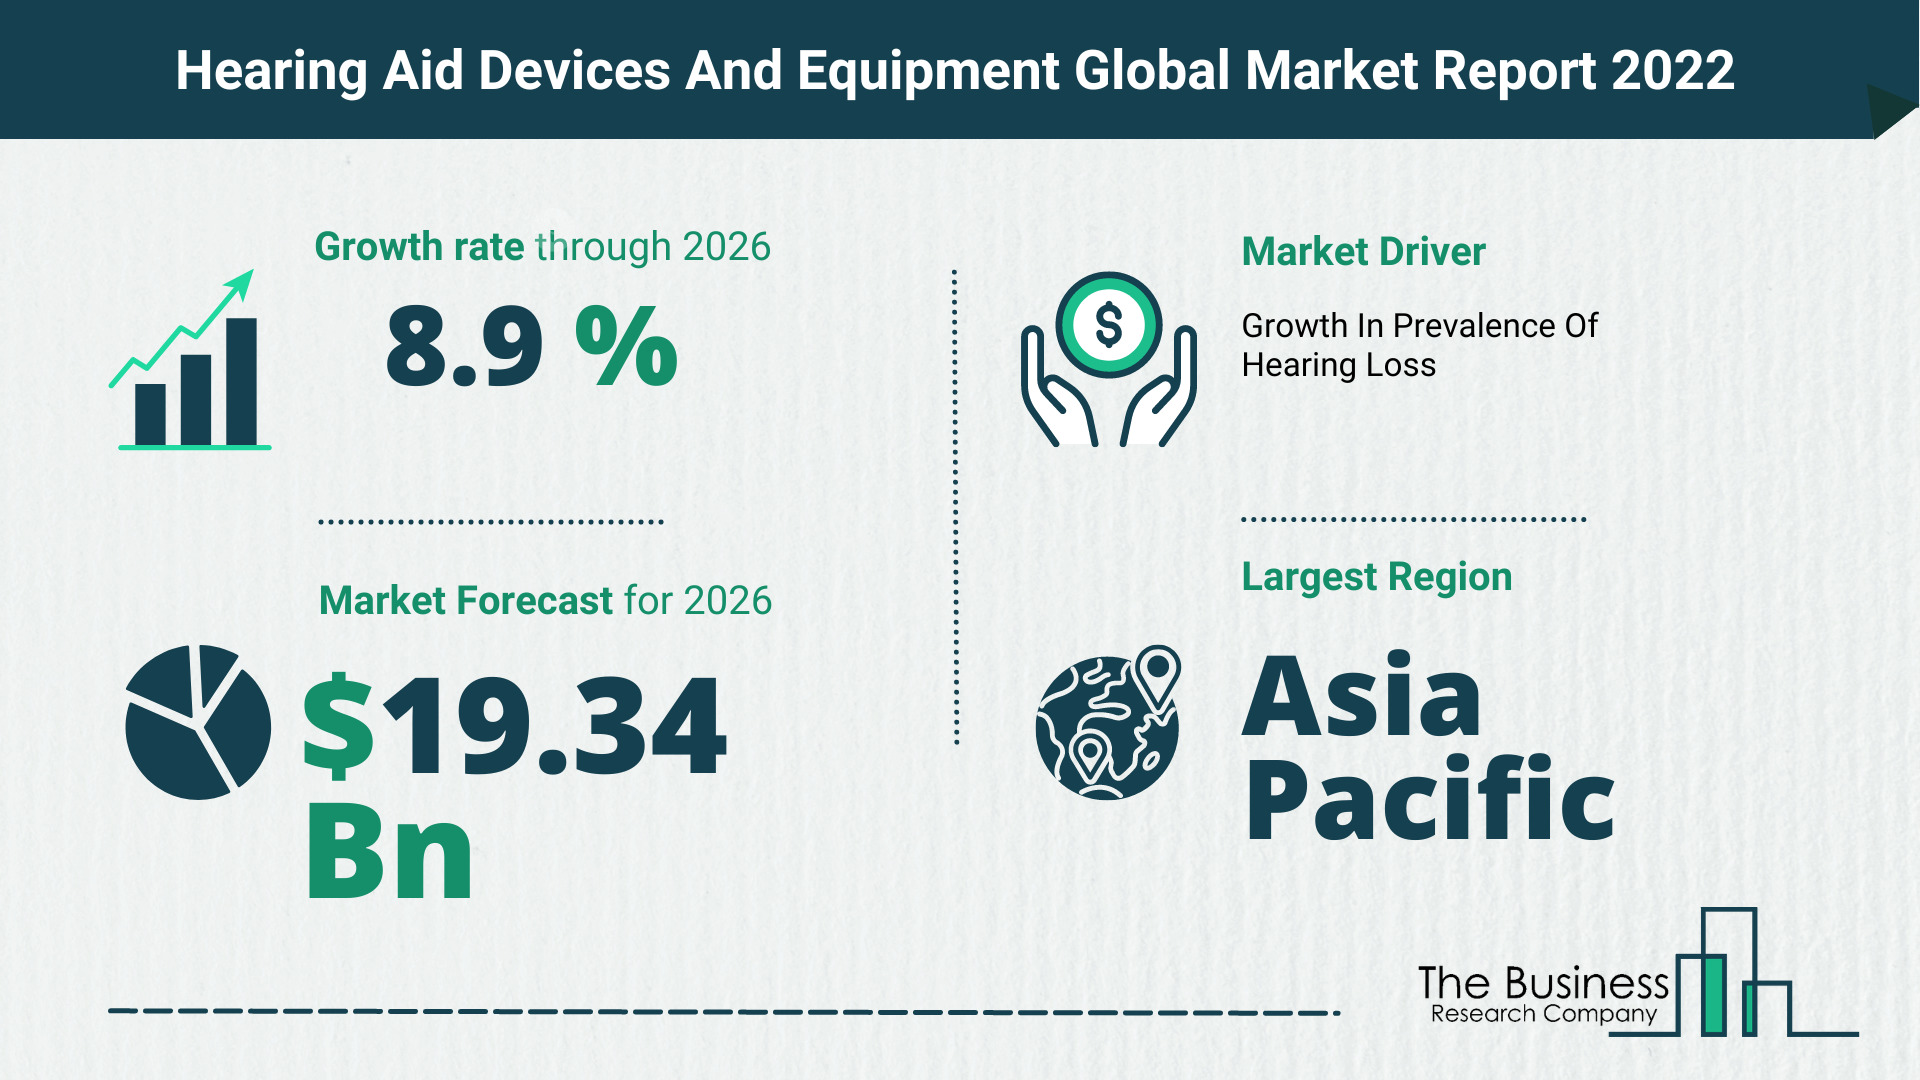 The Hearing Aid Devices And Equipment Market Share, Market Size, And Growth Rate 2022